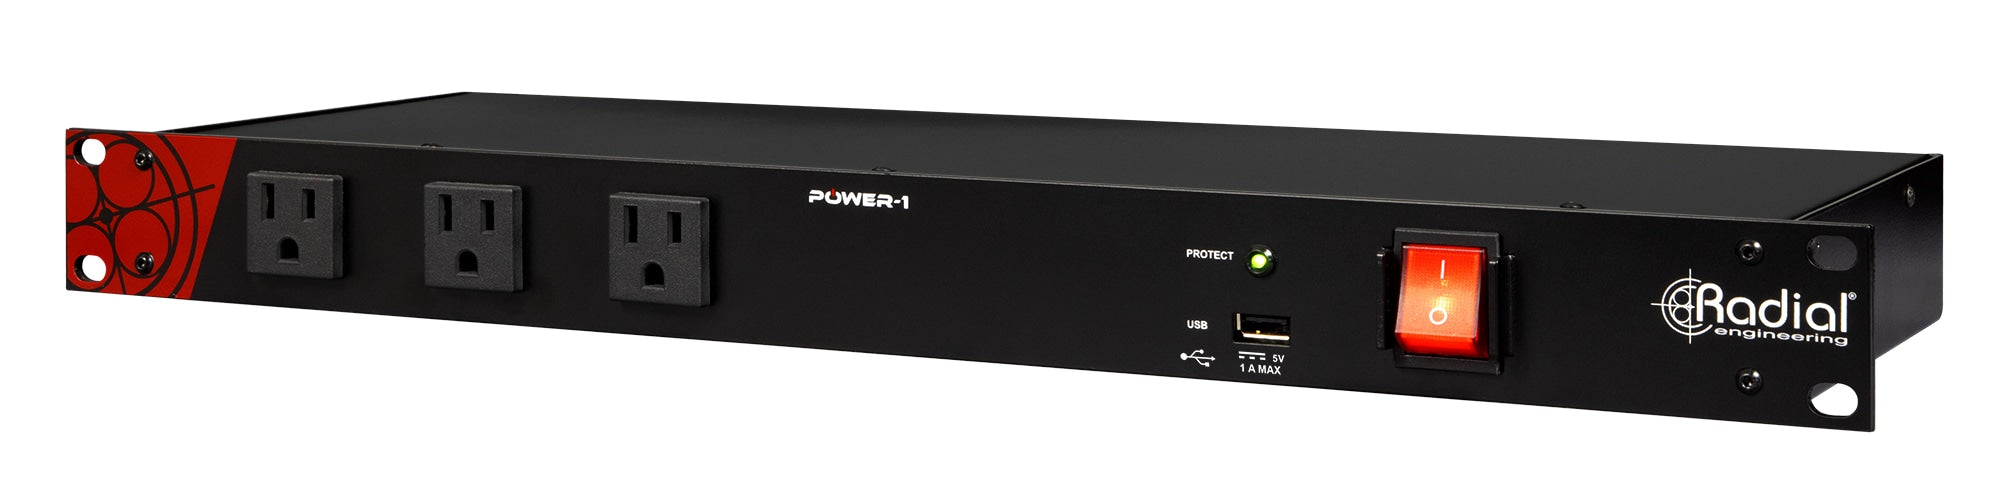 Radial Engineering Power-1 19" Rack mount power conditioner/surge supressor, 11 outlets